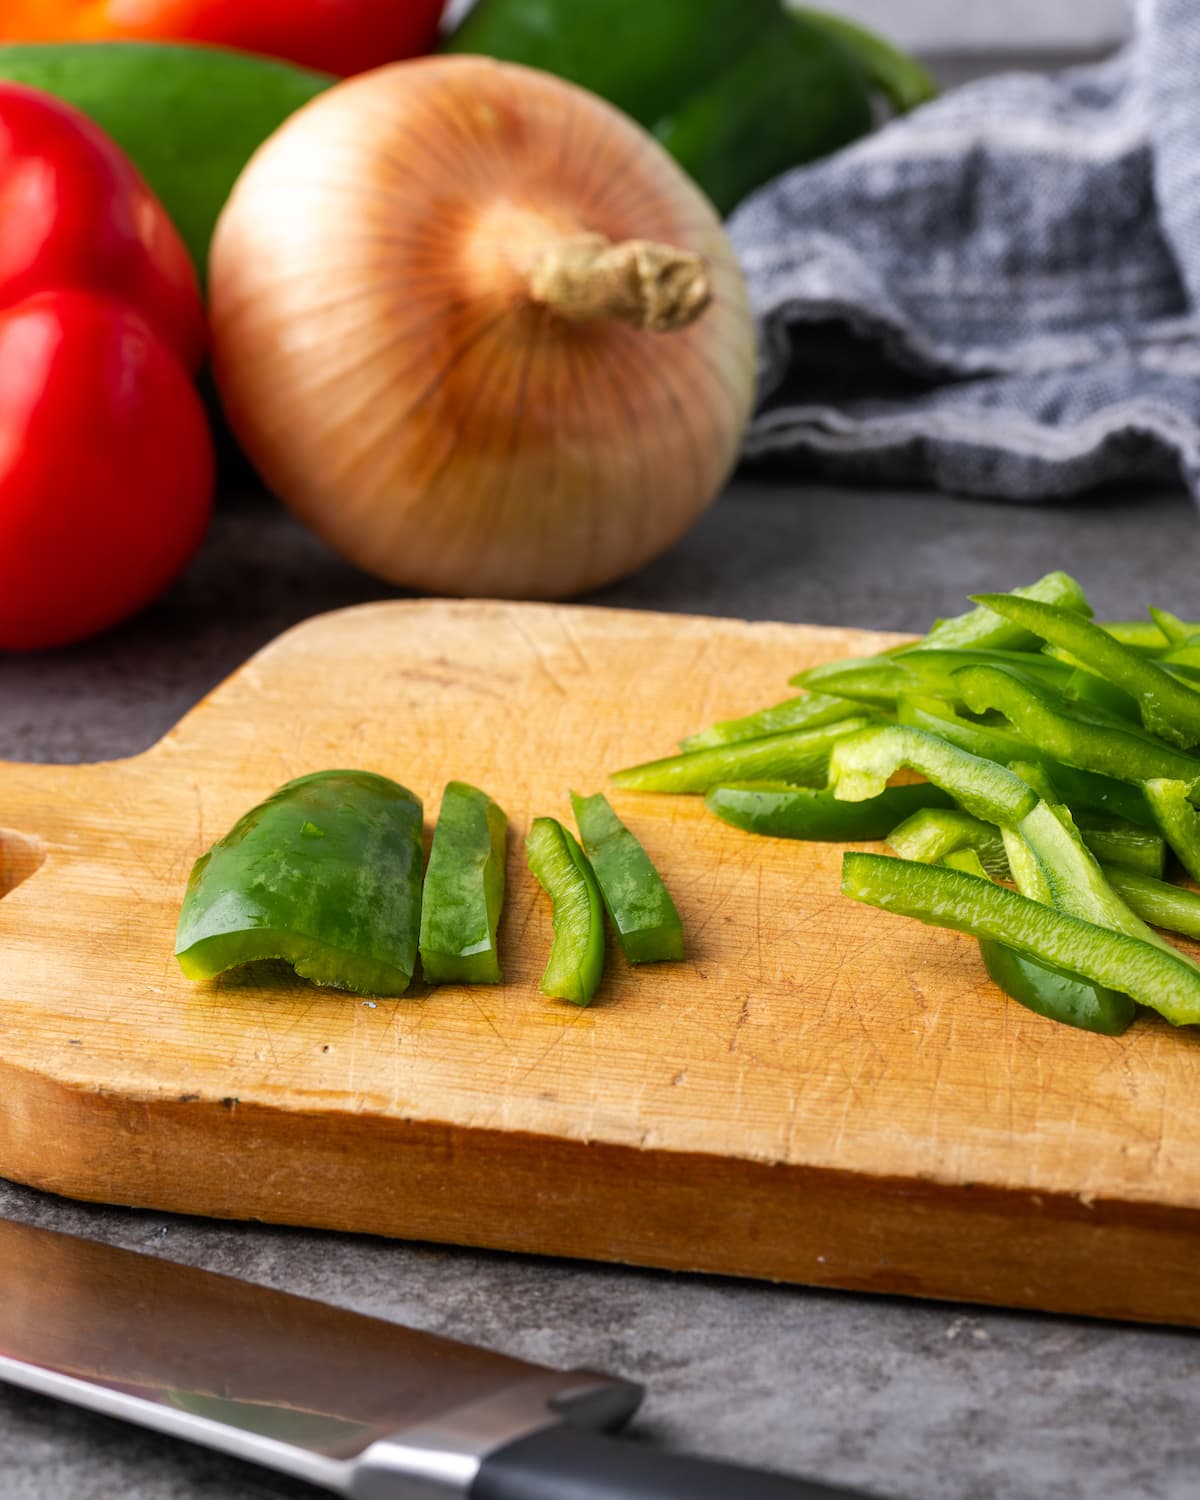 Chopped green bell peppers on a wooden cutting board, with an onion and tomatoes in the background.